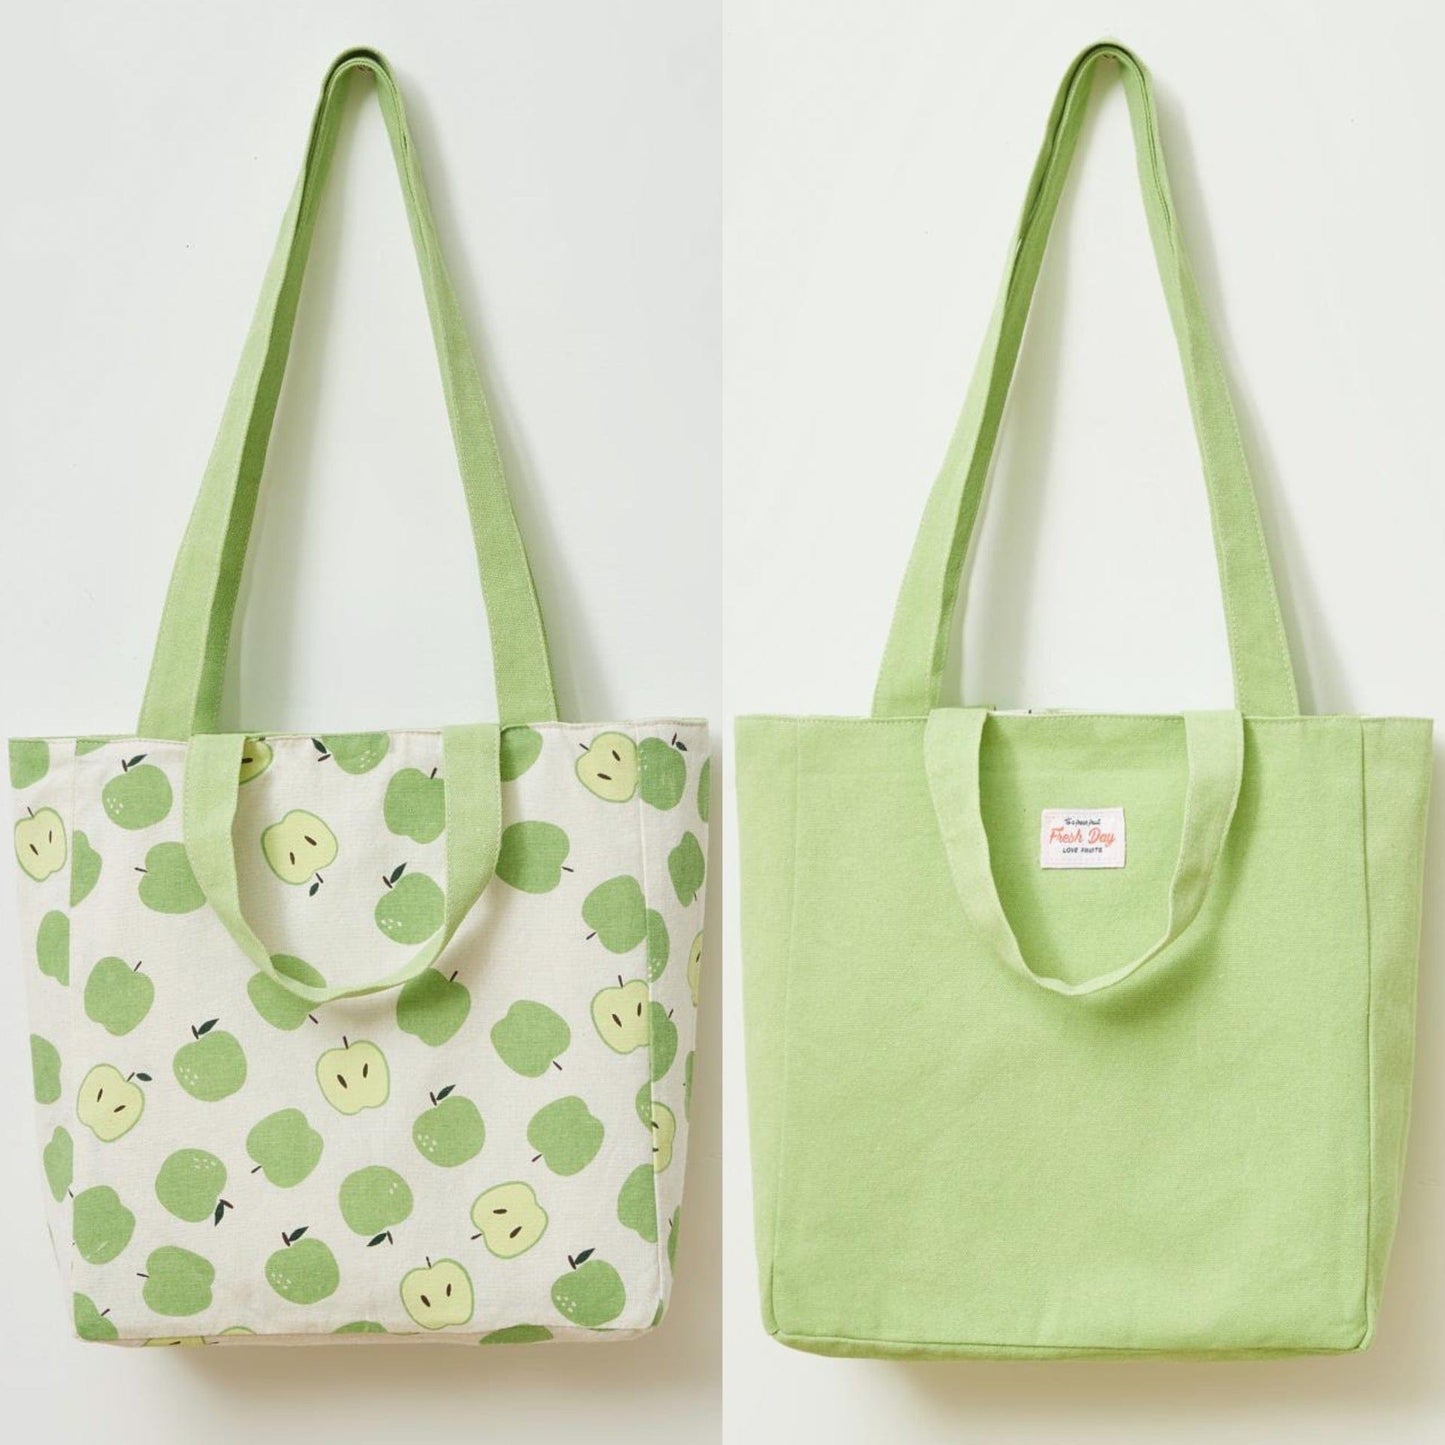 Tote Bag Green/Apples Tote Bag - Double Handle Two-Sided Fruit Canvas Shopping Bags